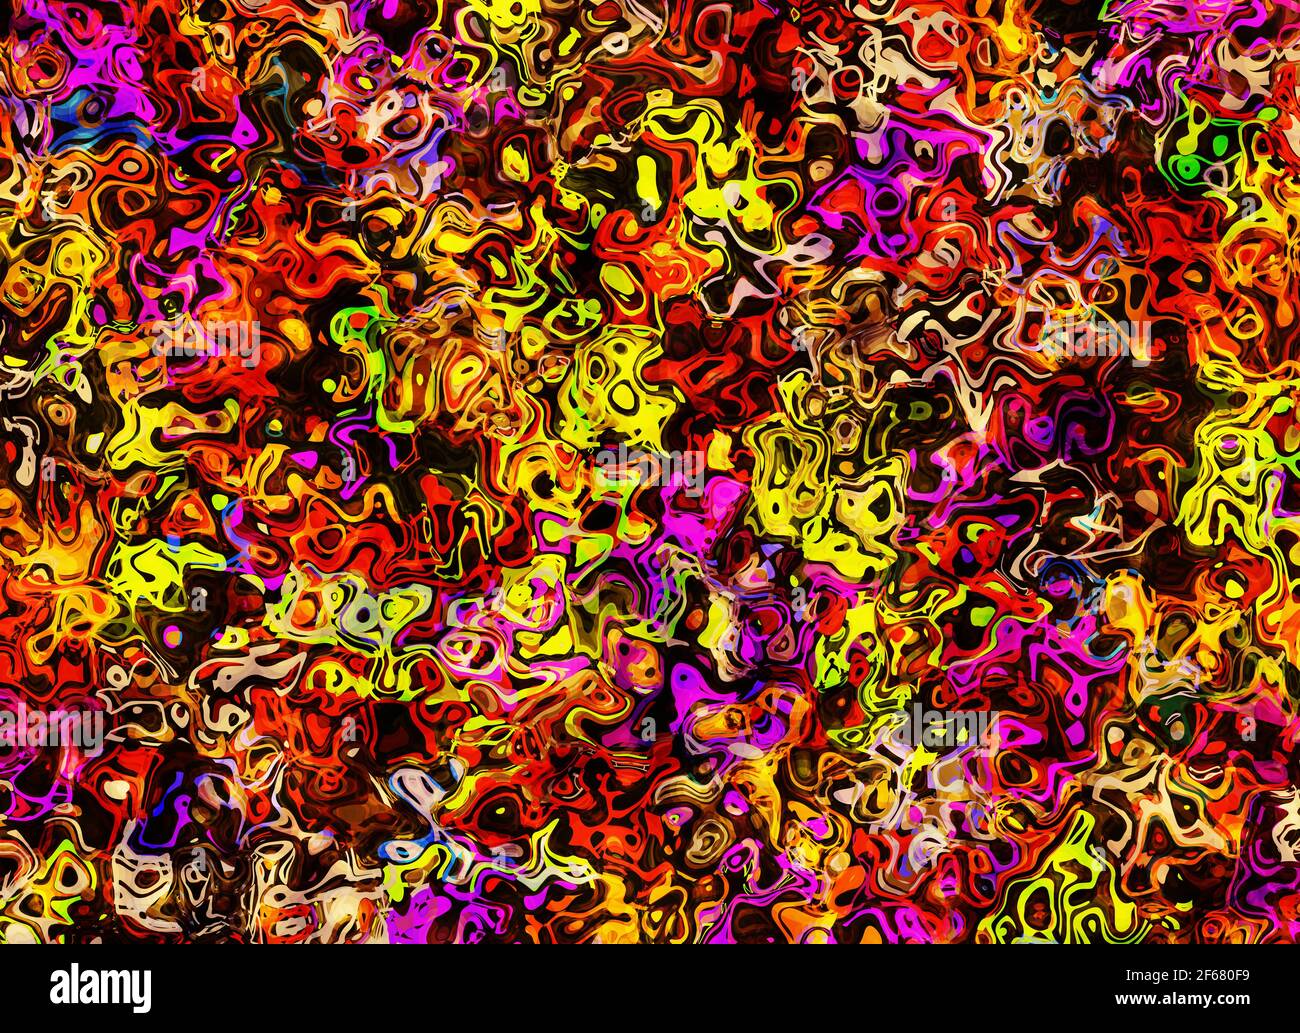 Abstract multicolored painted graffiti backgrounds Stock Photo